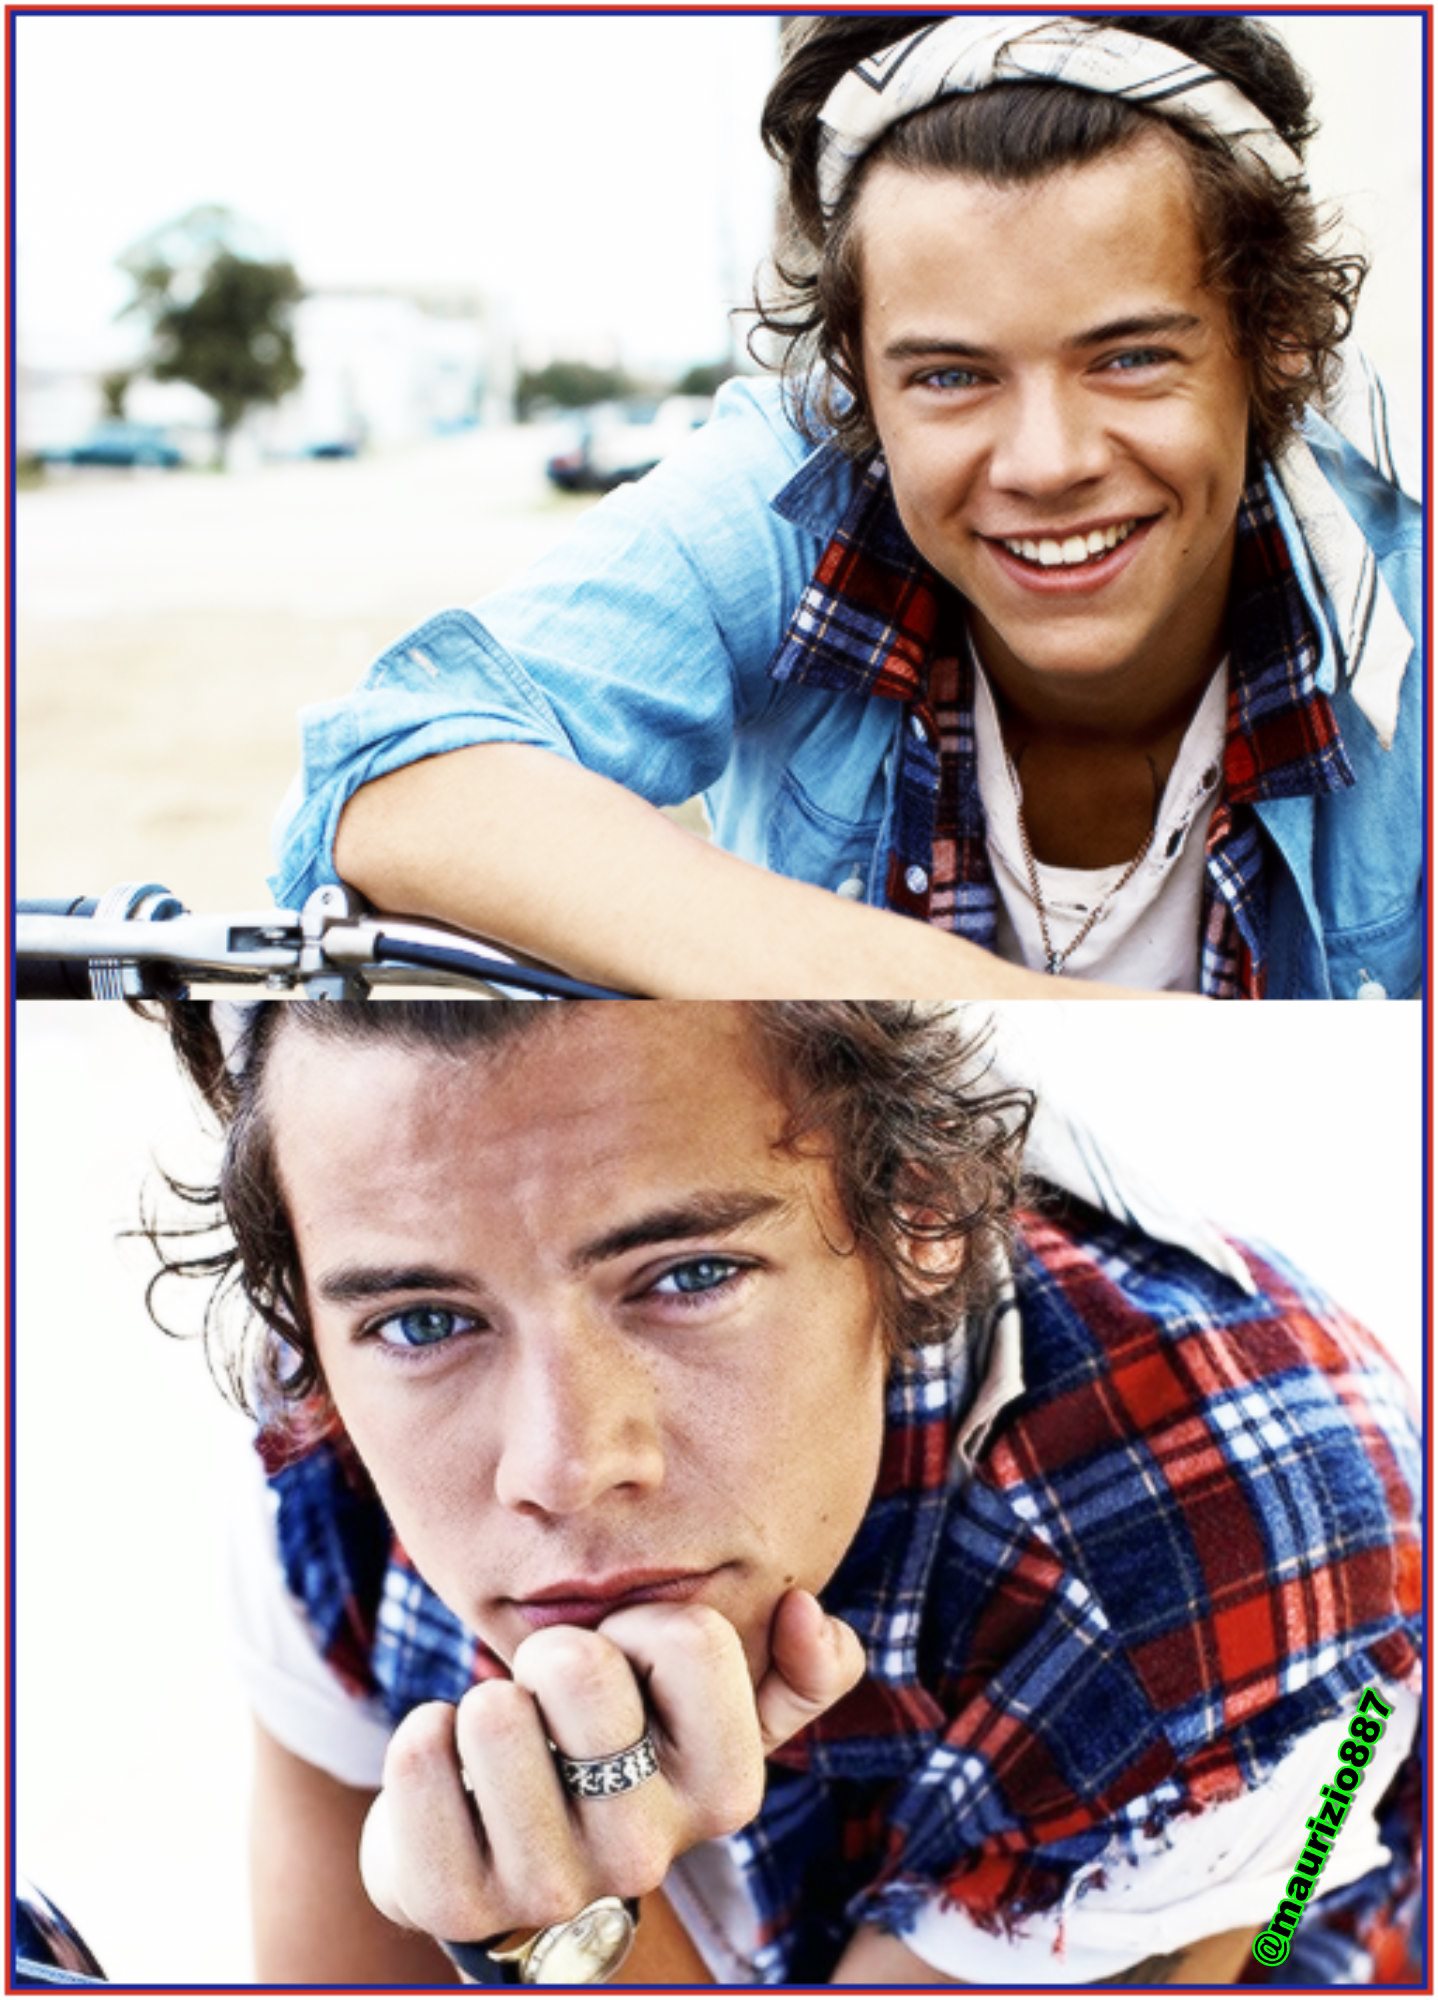 Calibre mesh tyktflydende Harry Styles 2013 - One Direction photo (35336386) - fanpop